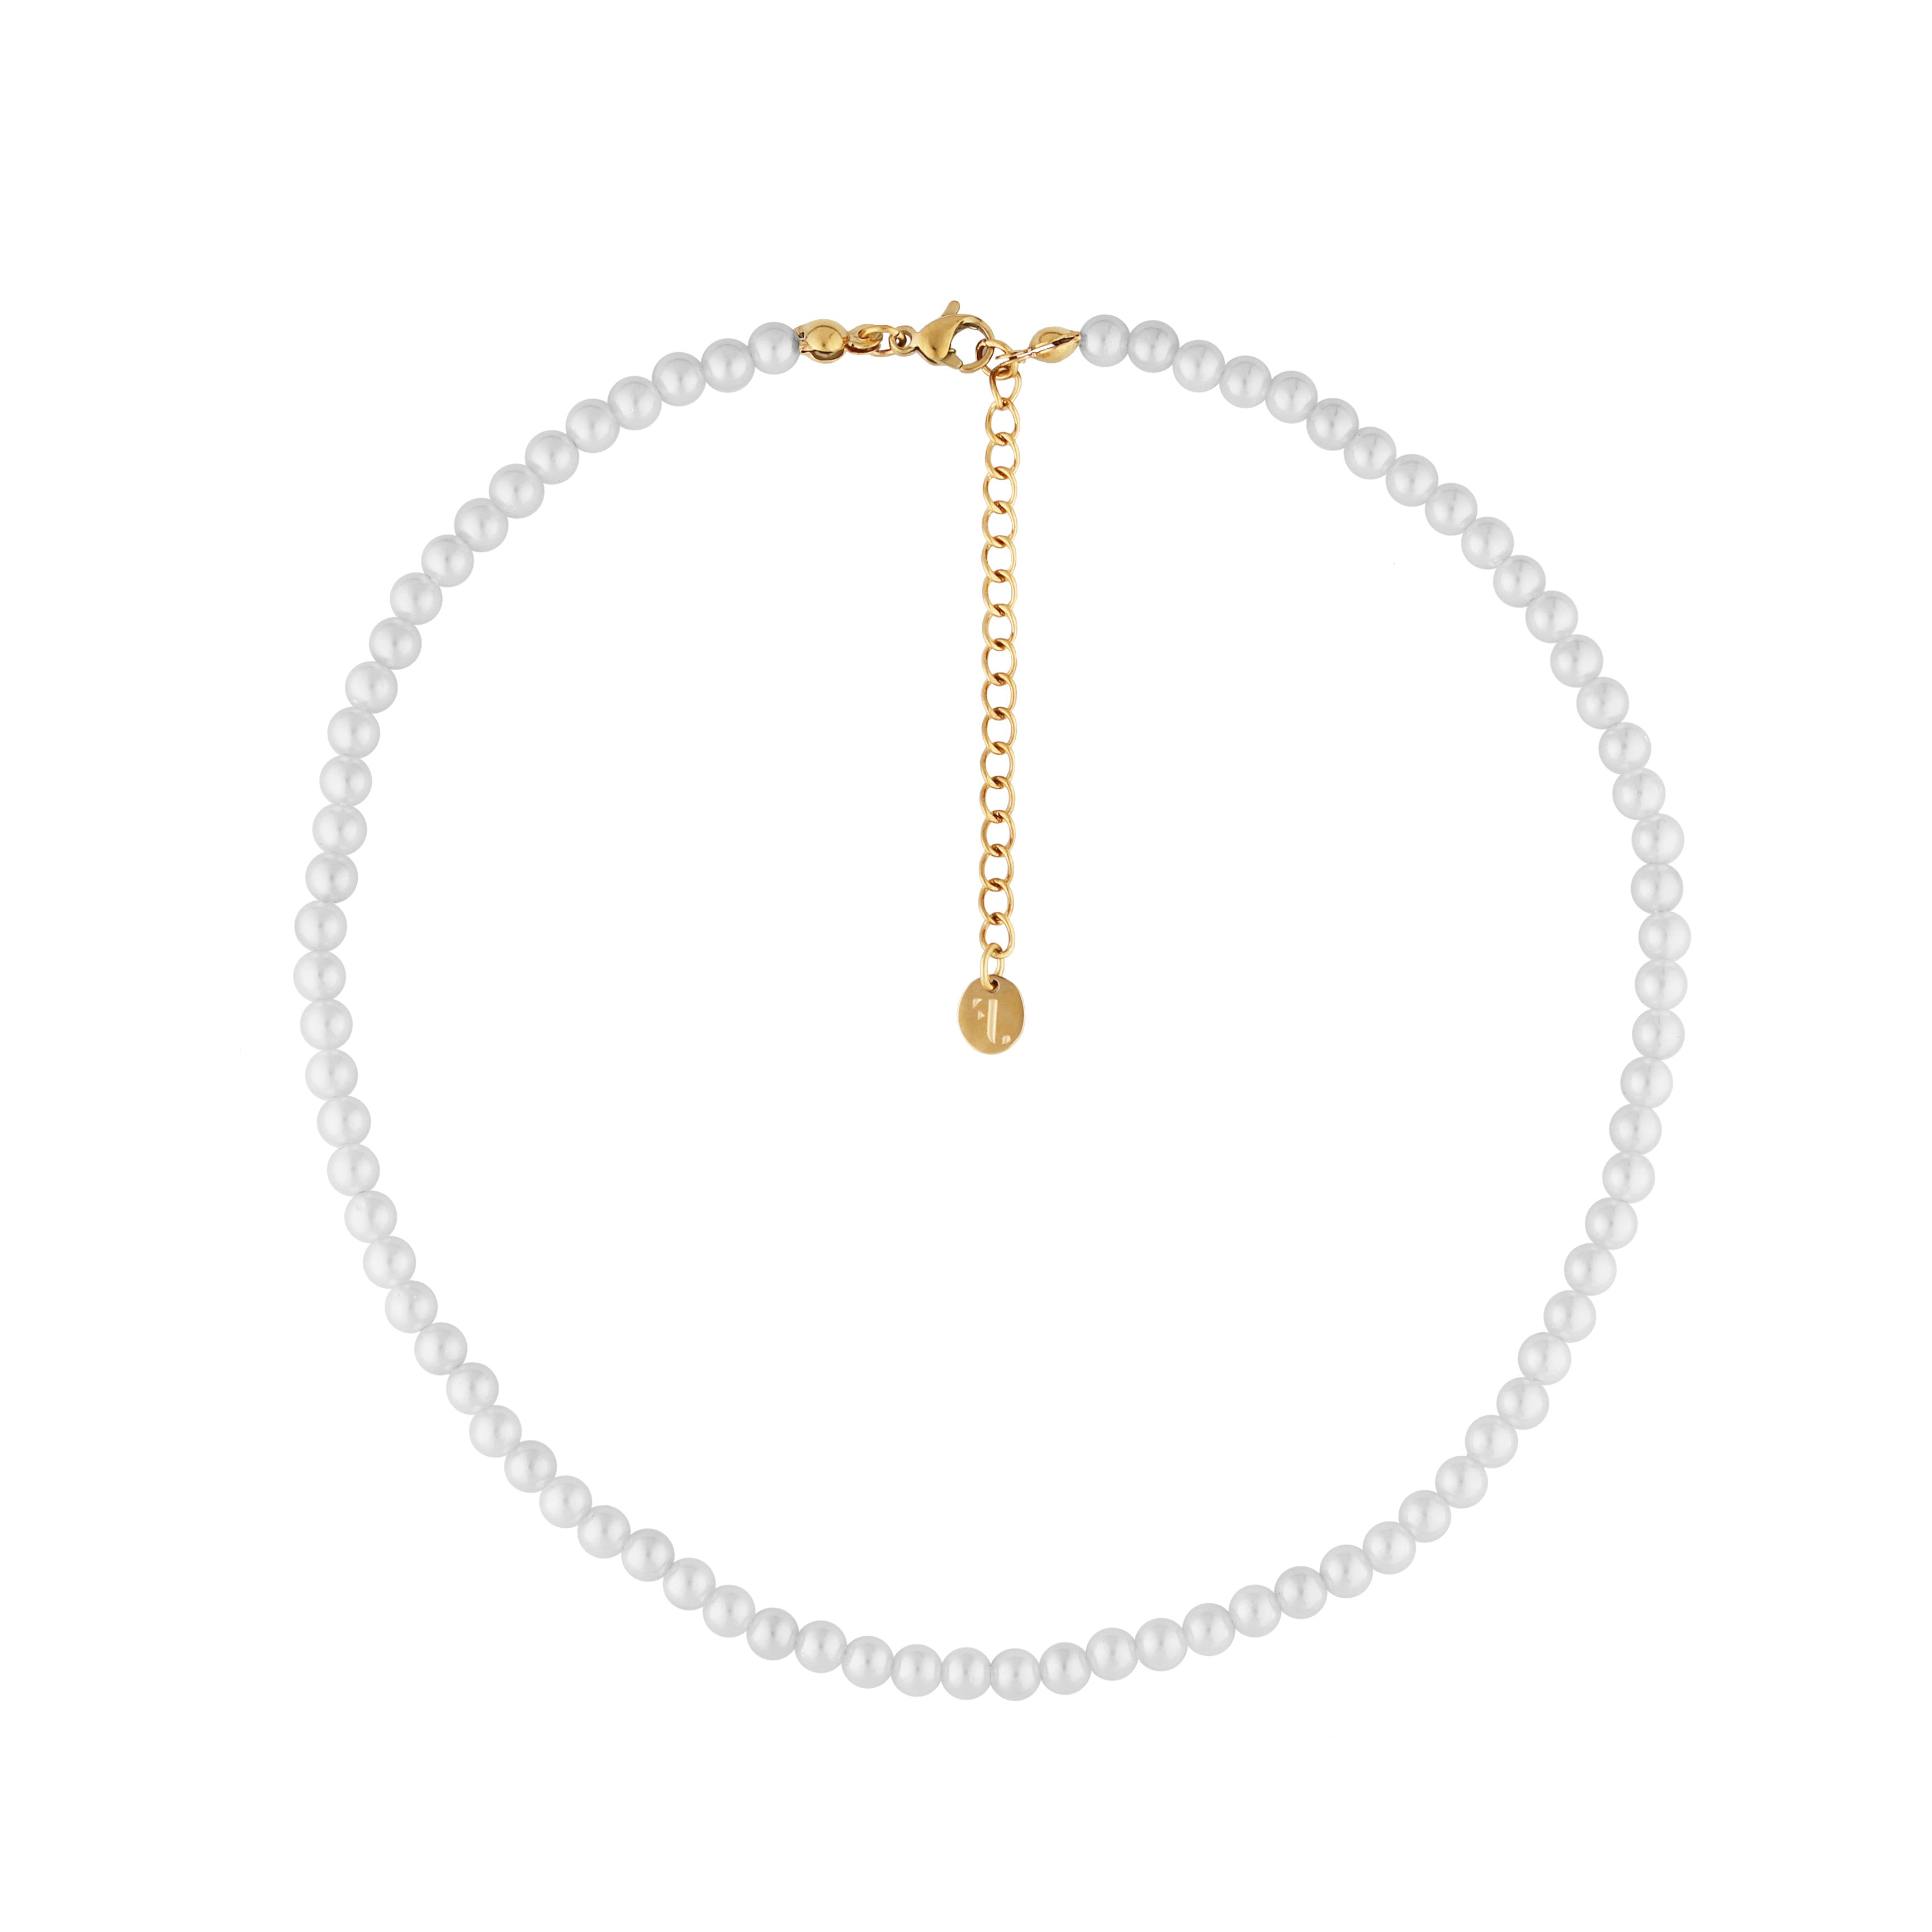 FJ Watches five jwlry bijou jewel jewelry Baby var necklace collier white beads pearls small perle bille petite blanche verre 4mm 37cm 5cm extension adjustable ajustable gold or 14k closure women femme glass water eau resiste resistant montreal canada design